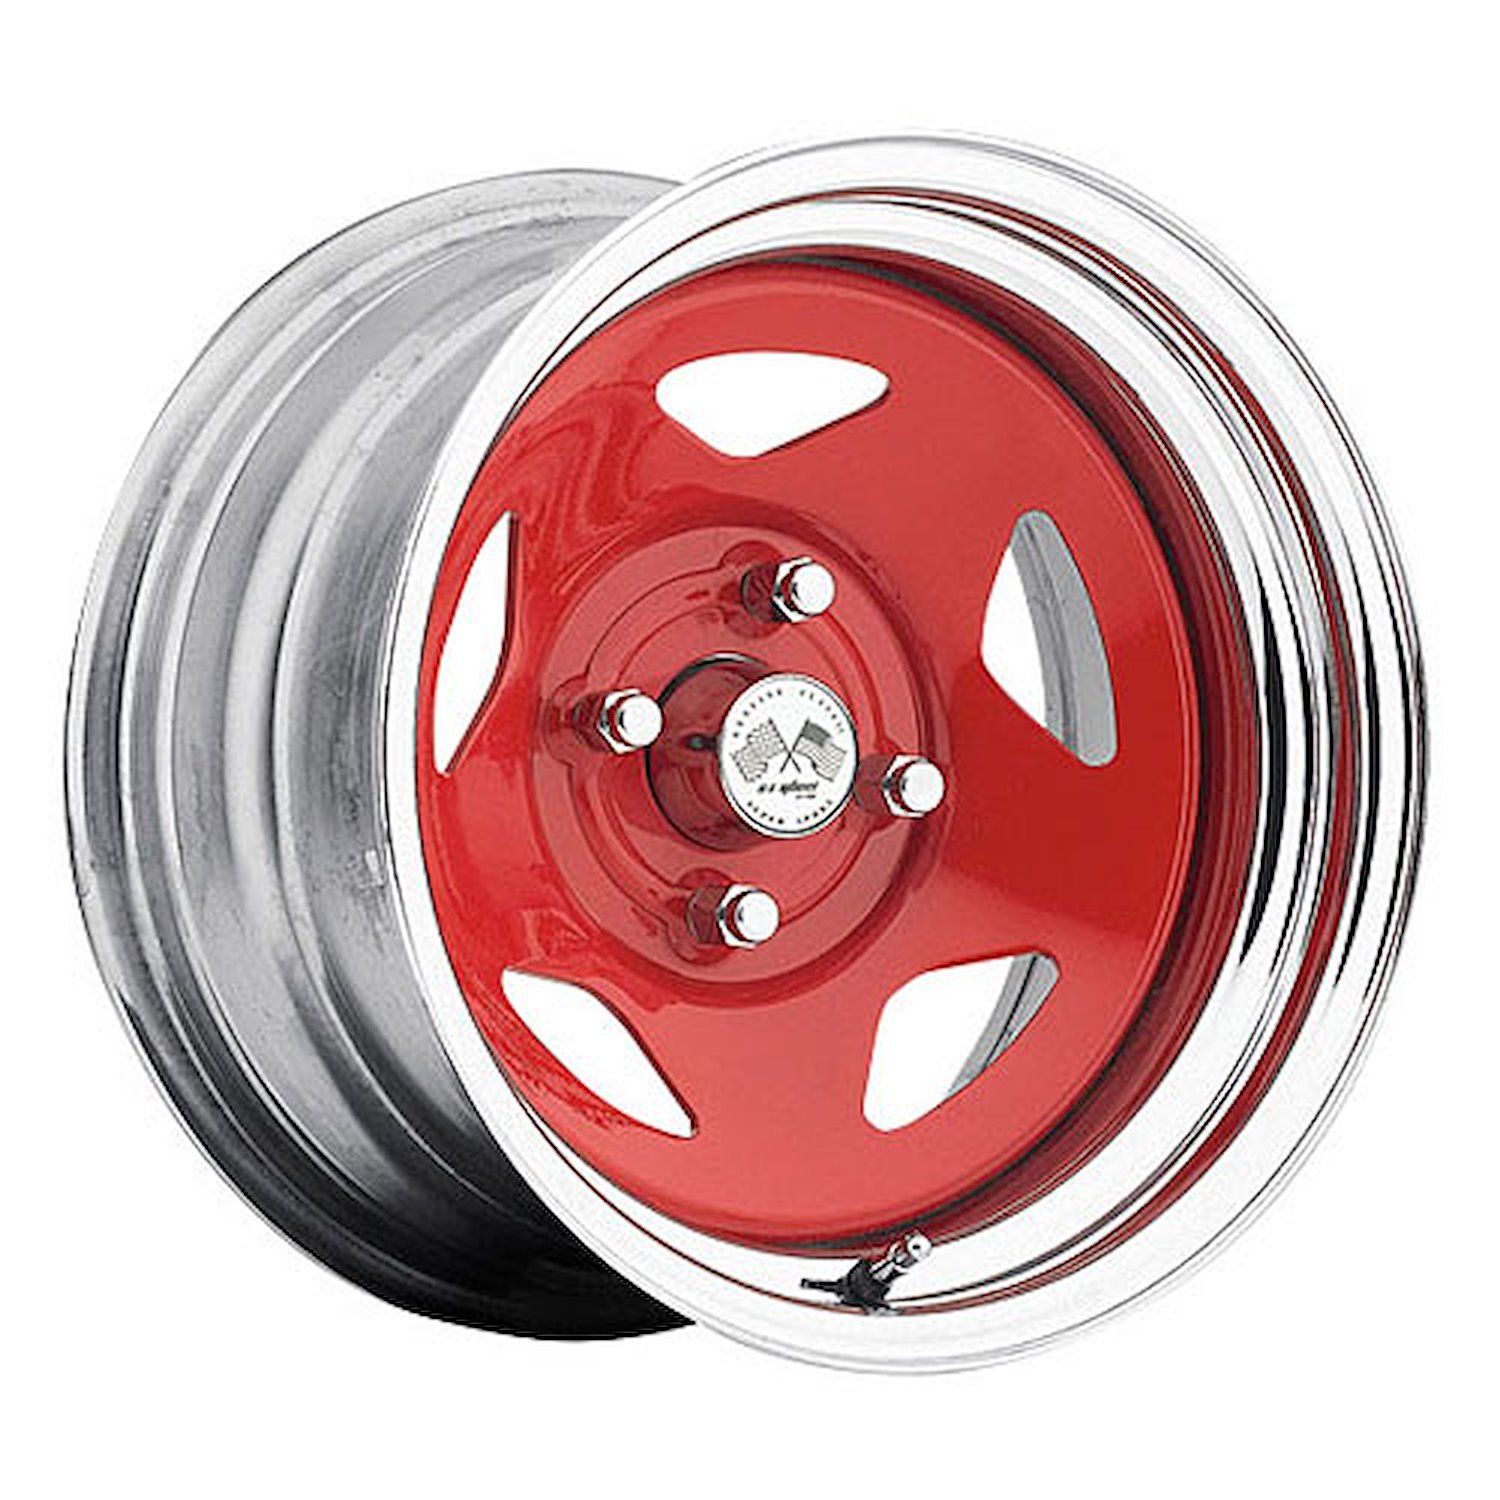 CHROME STAR FWD DRIFTER RED 15 x 8 5 x 45 Bolt Circle 4.5 Back Spacing 0 offset 266 Center Bore 1400 lbs Load Rating